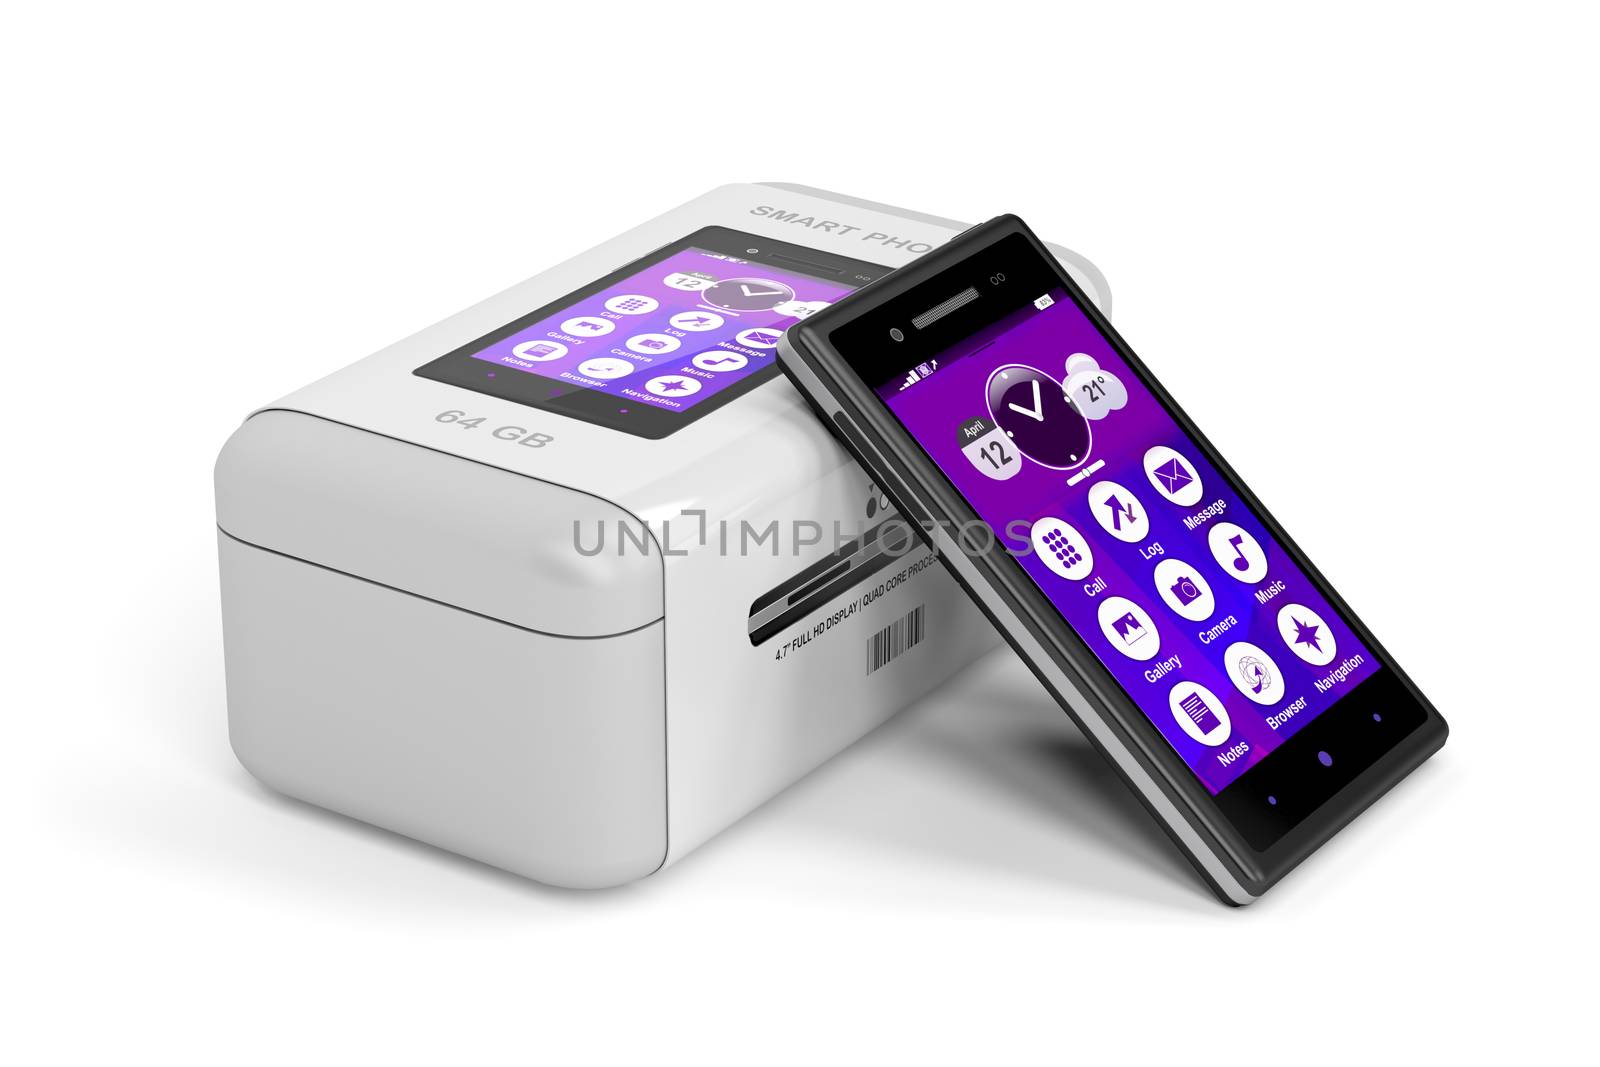 Smartphone with touchscreen by magraphics